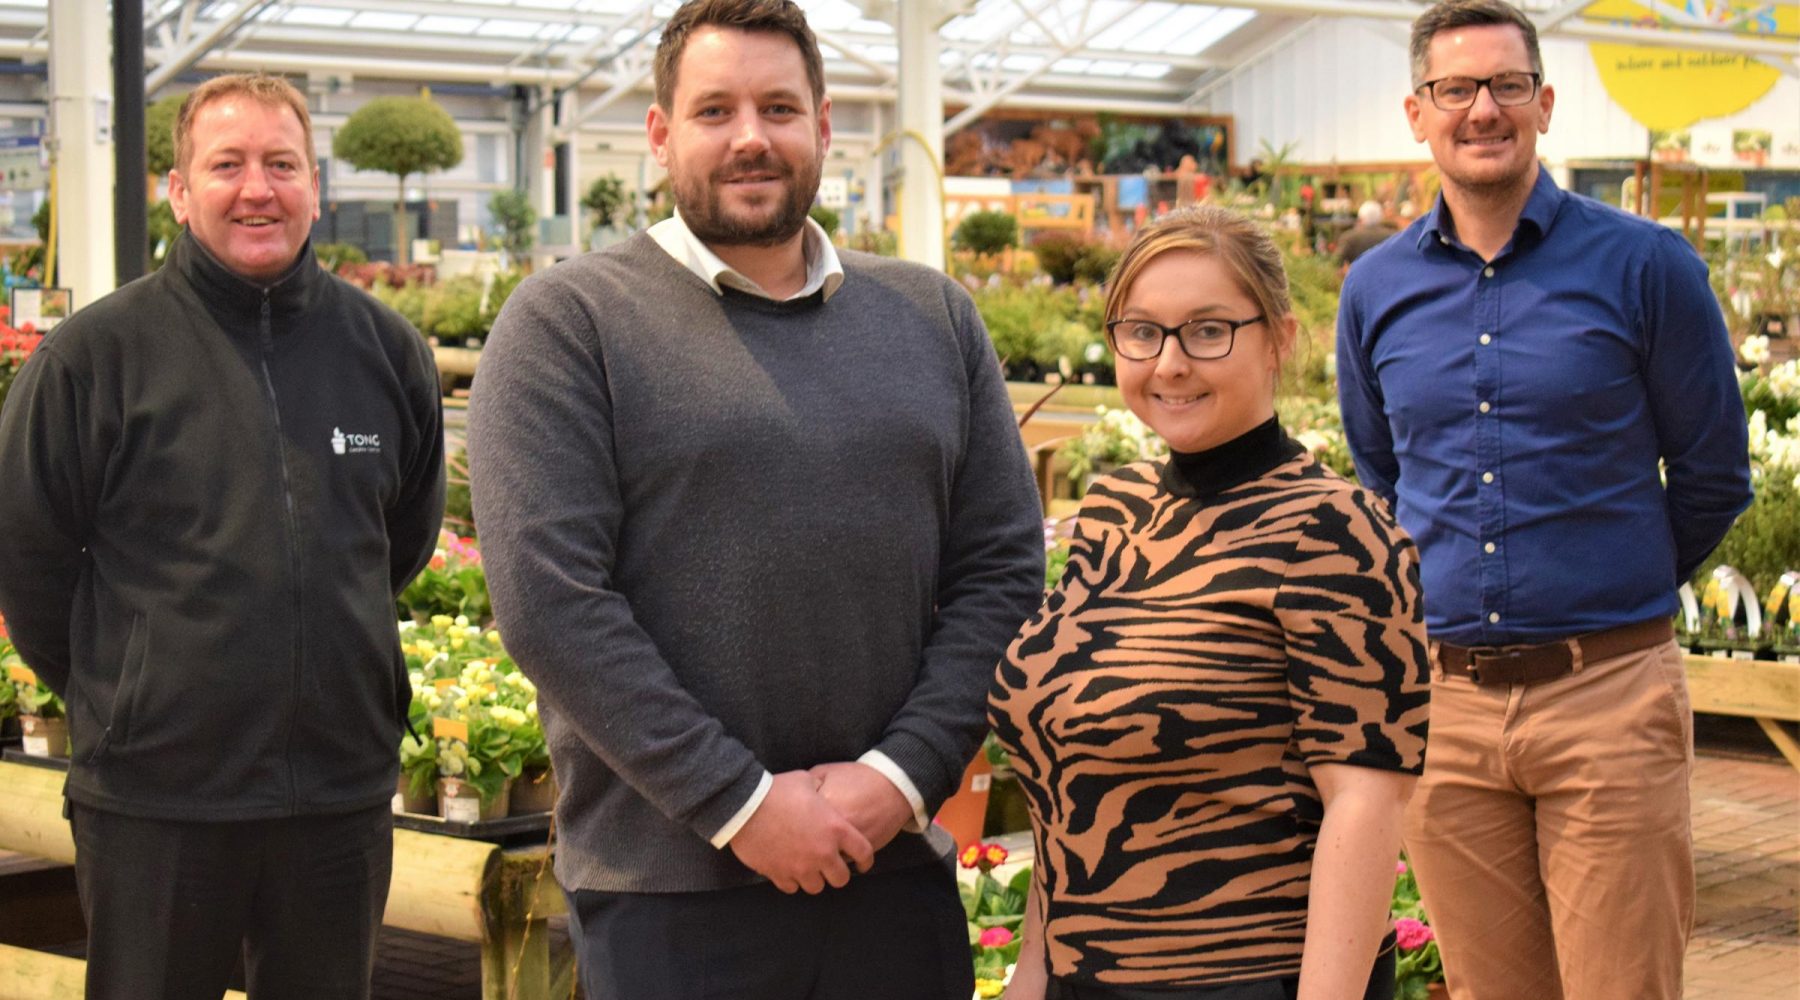 New staff recruited at Tong Garden Centre